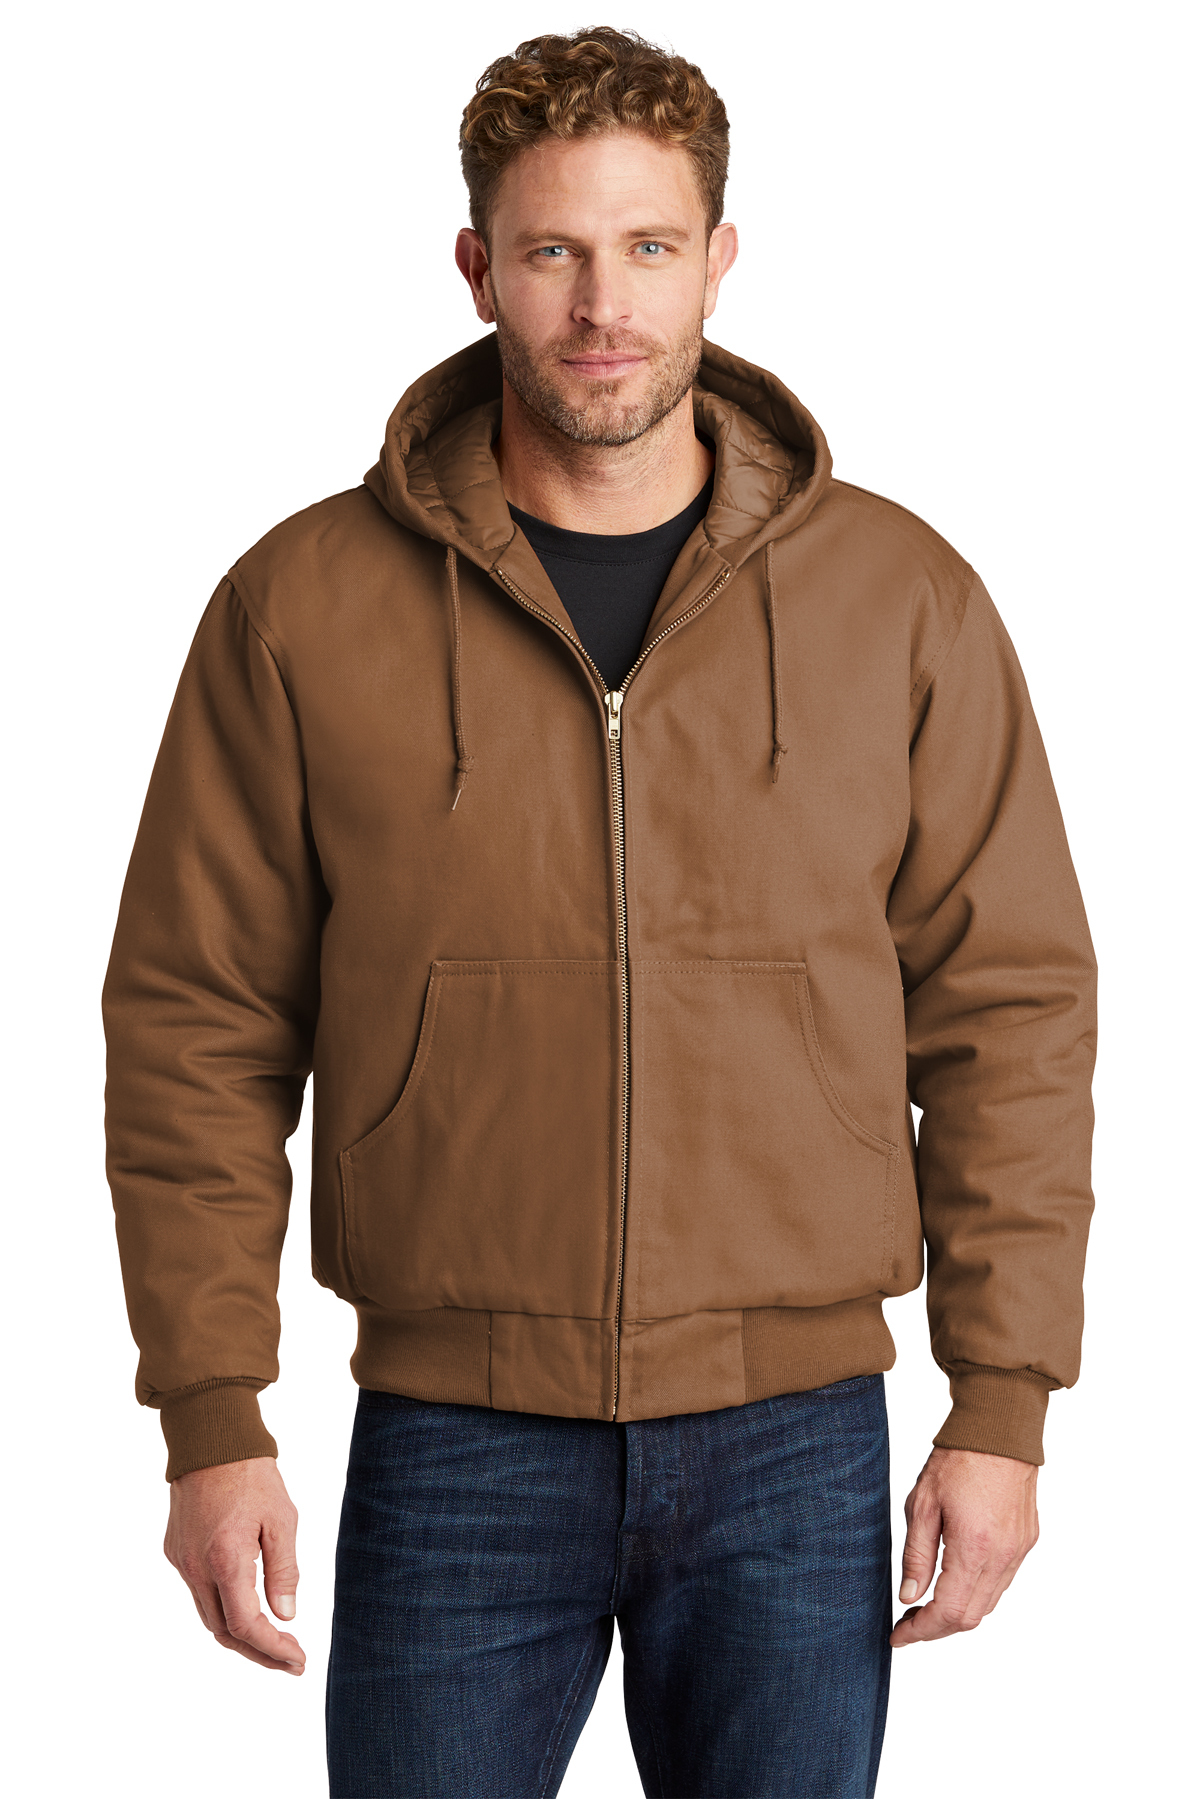 Cornerstone Mens Big And Tall Hooded Drawcord Work Jacket_Duck Brown_4XLT